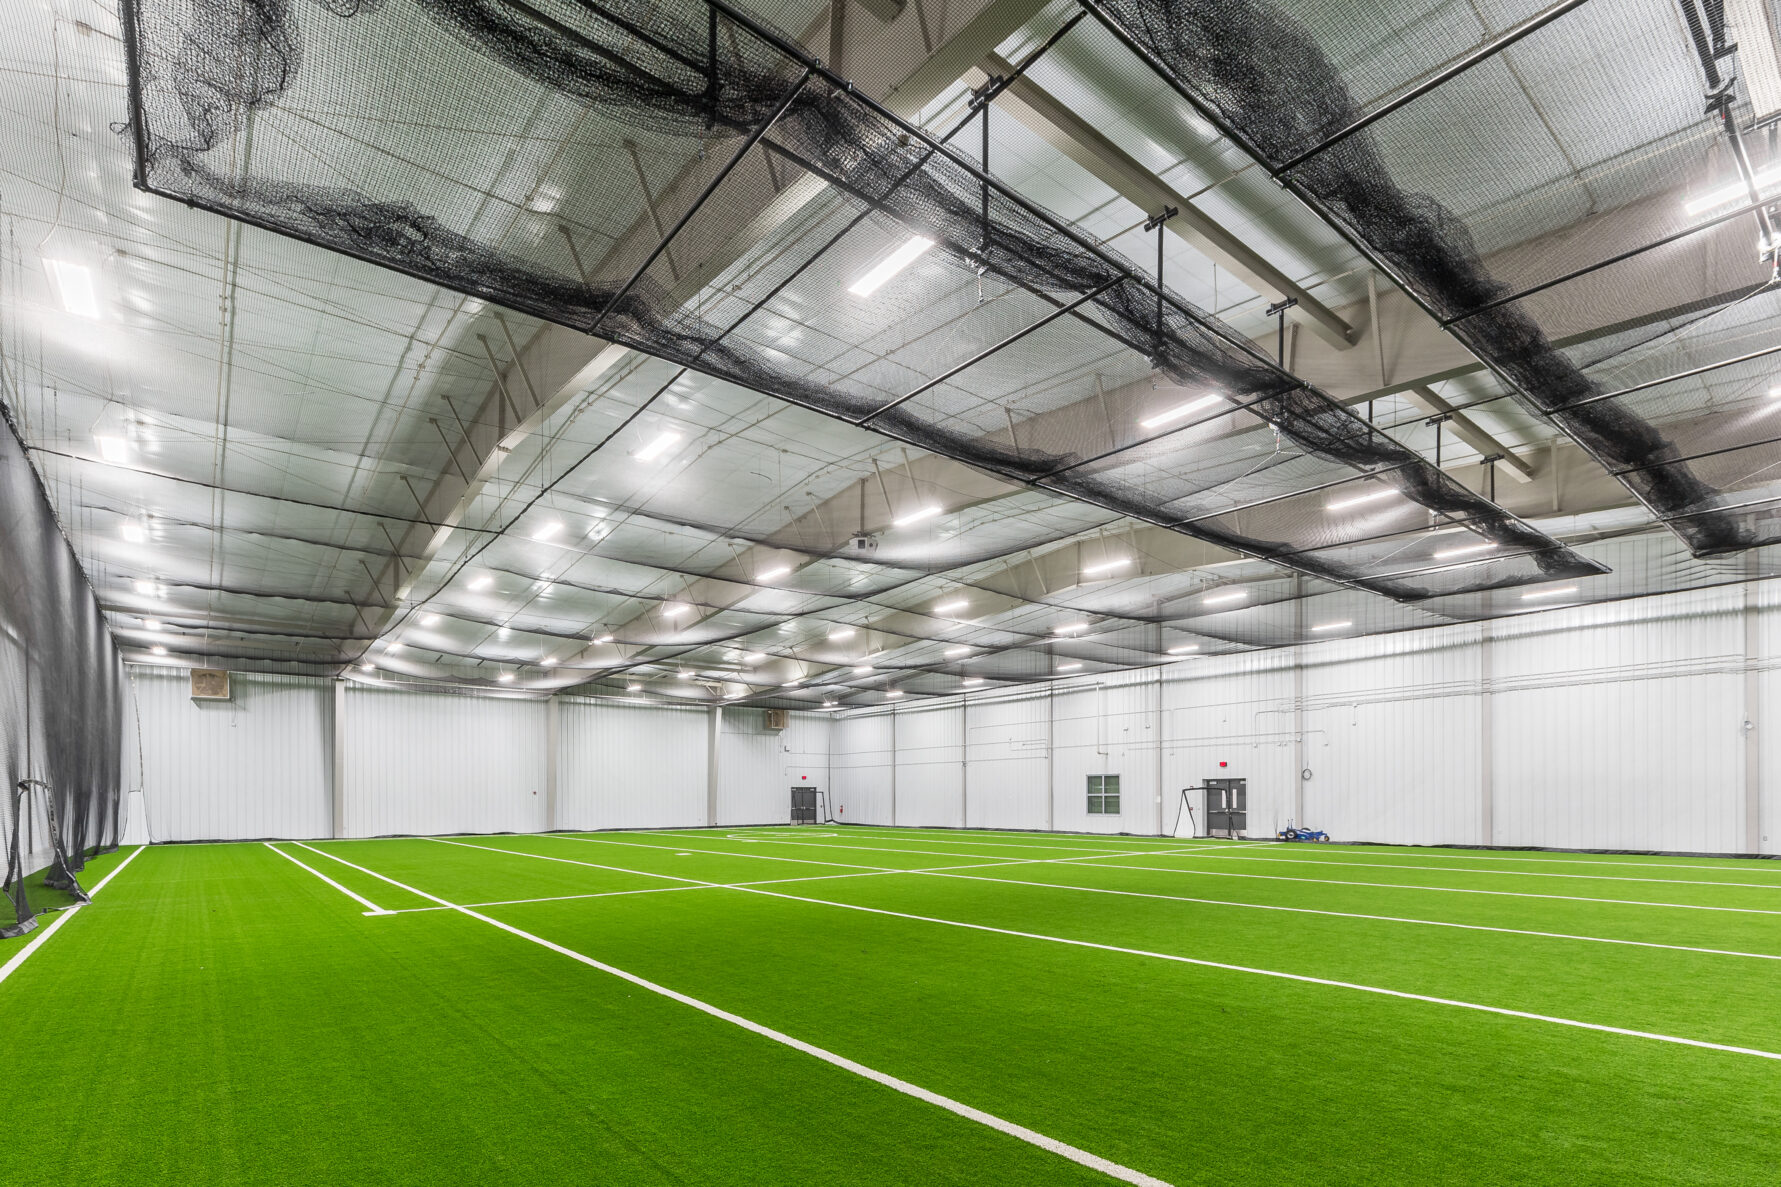 Derby High Indoor Field Built by McCownGordon Construction